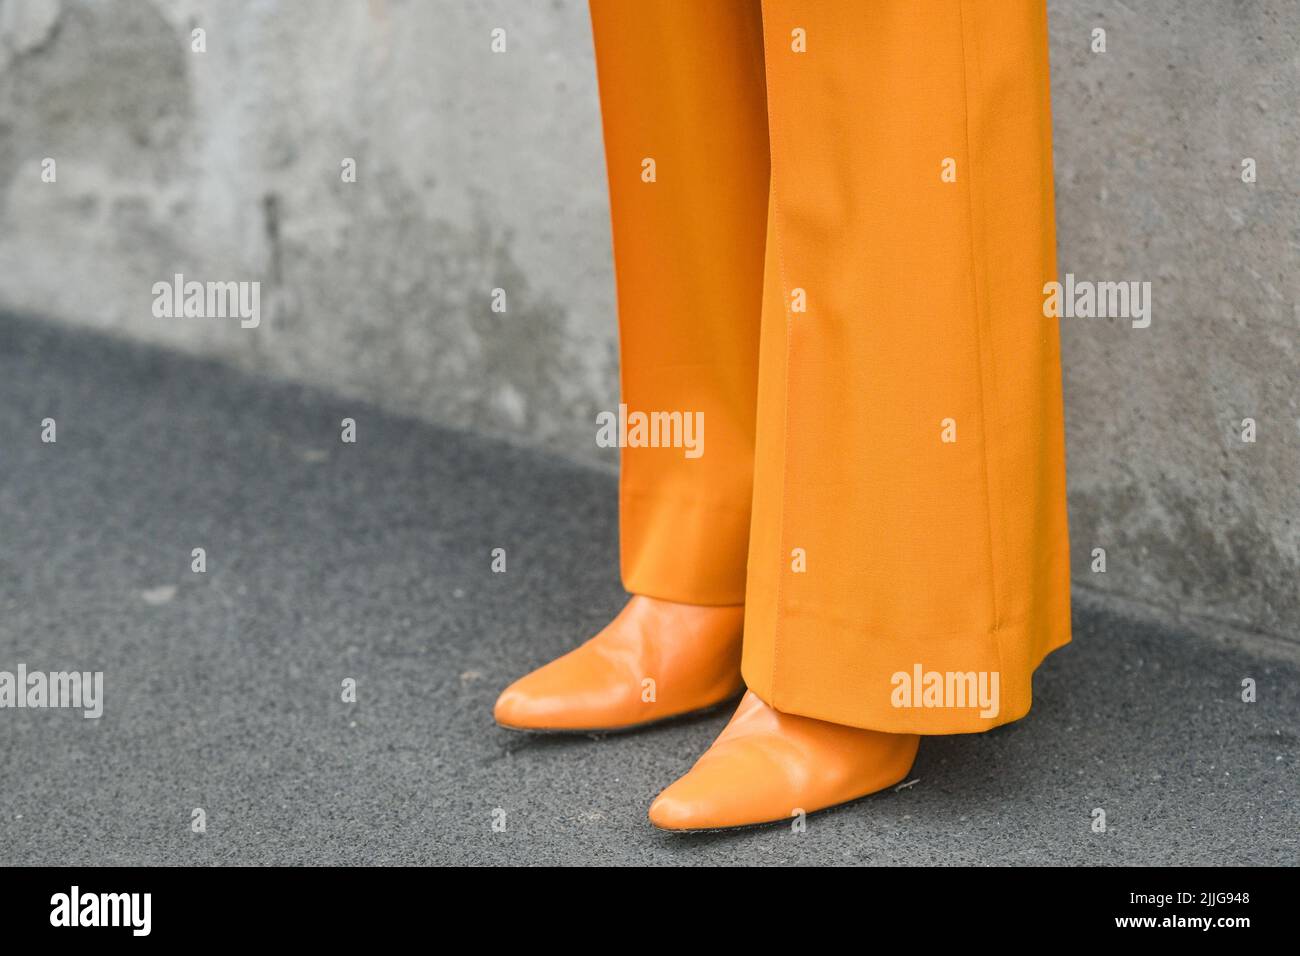 MILAN, ITALY - FEBRUARY 24, 2022: Woman wearing orange outfit: blazer jacket, pants and shoes. Stock Photo